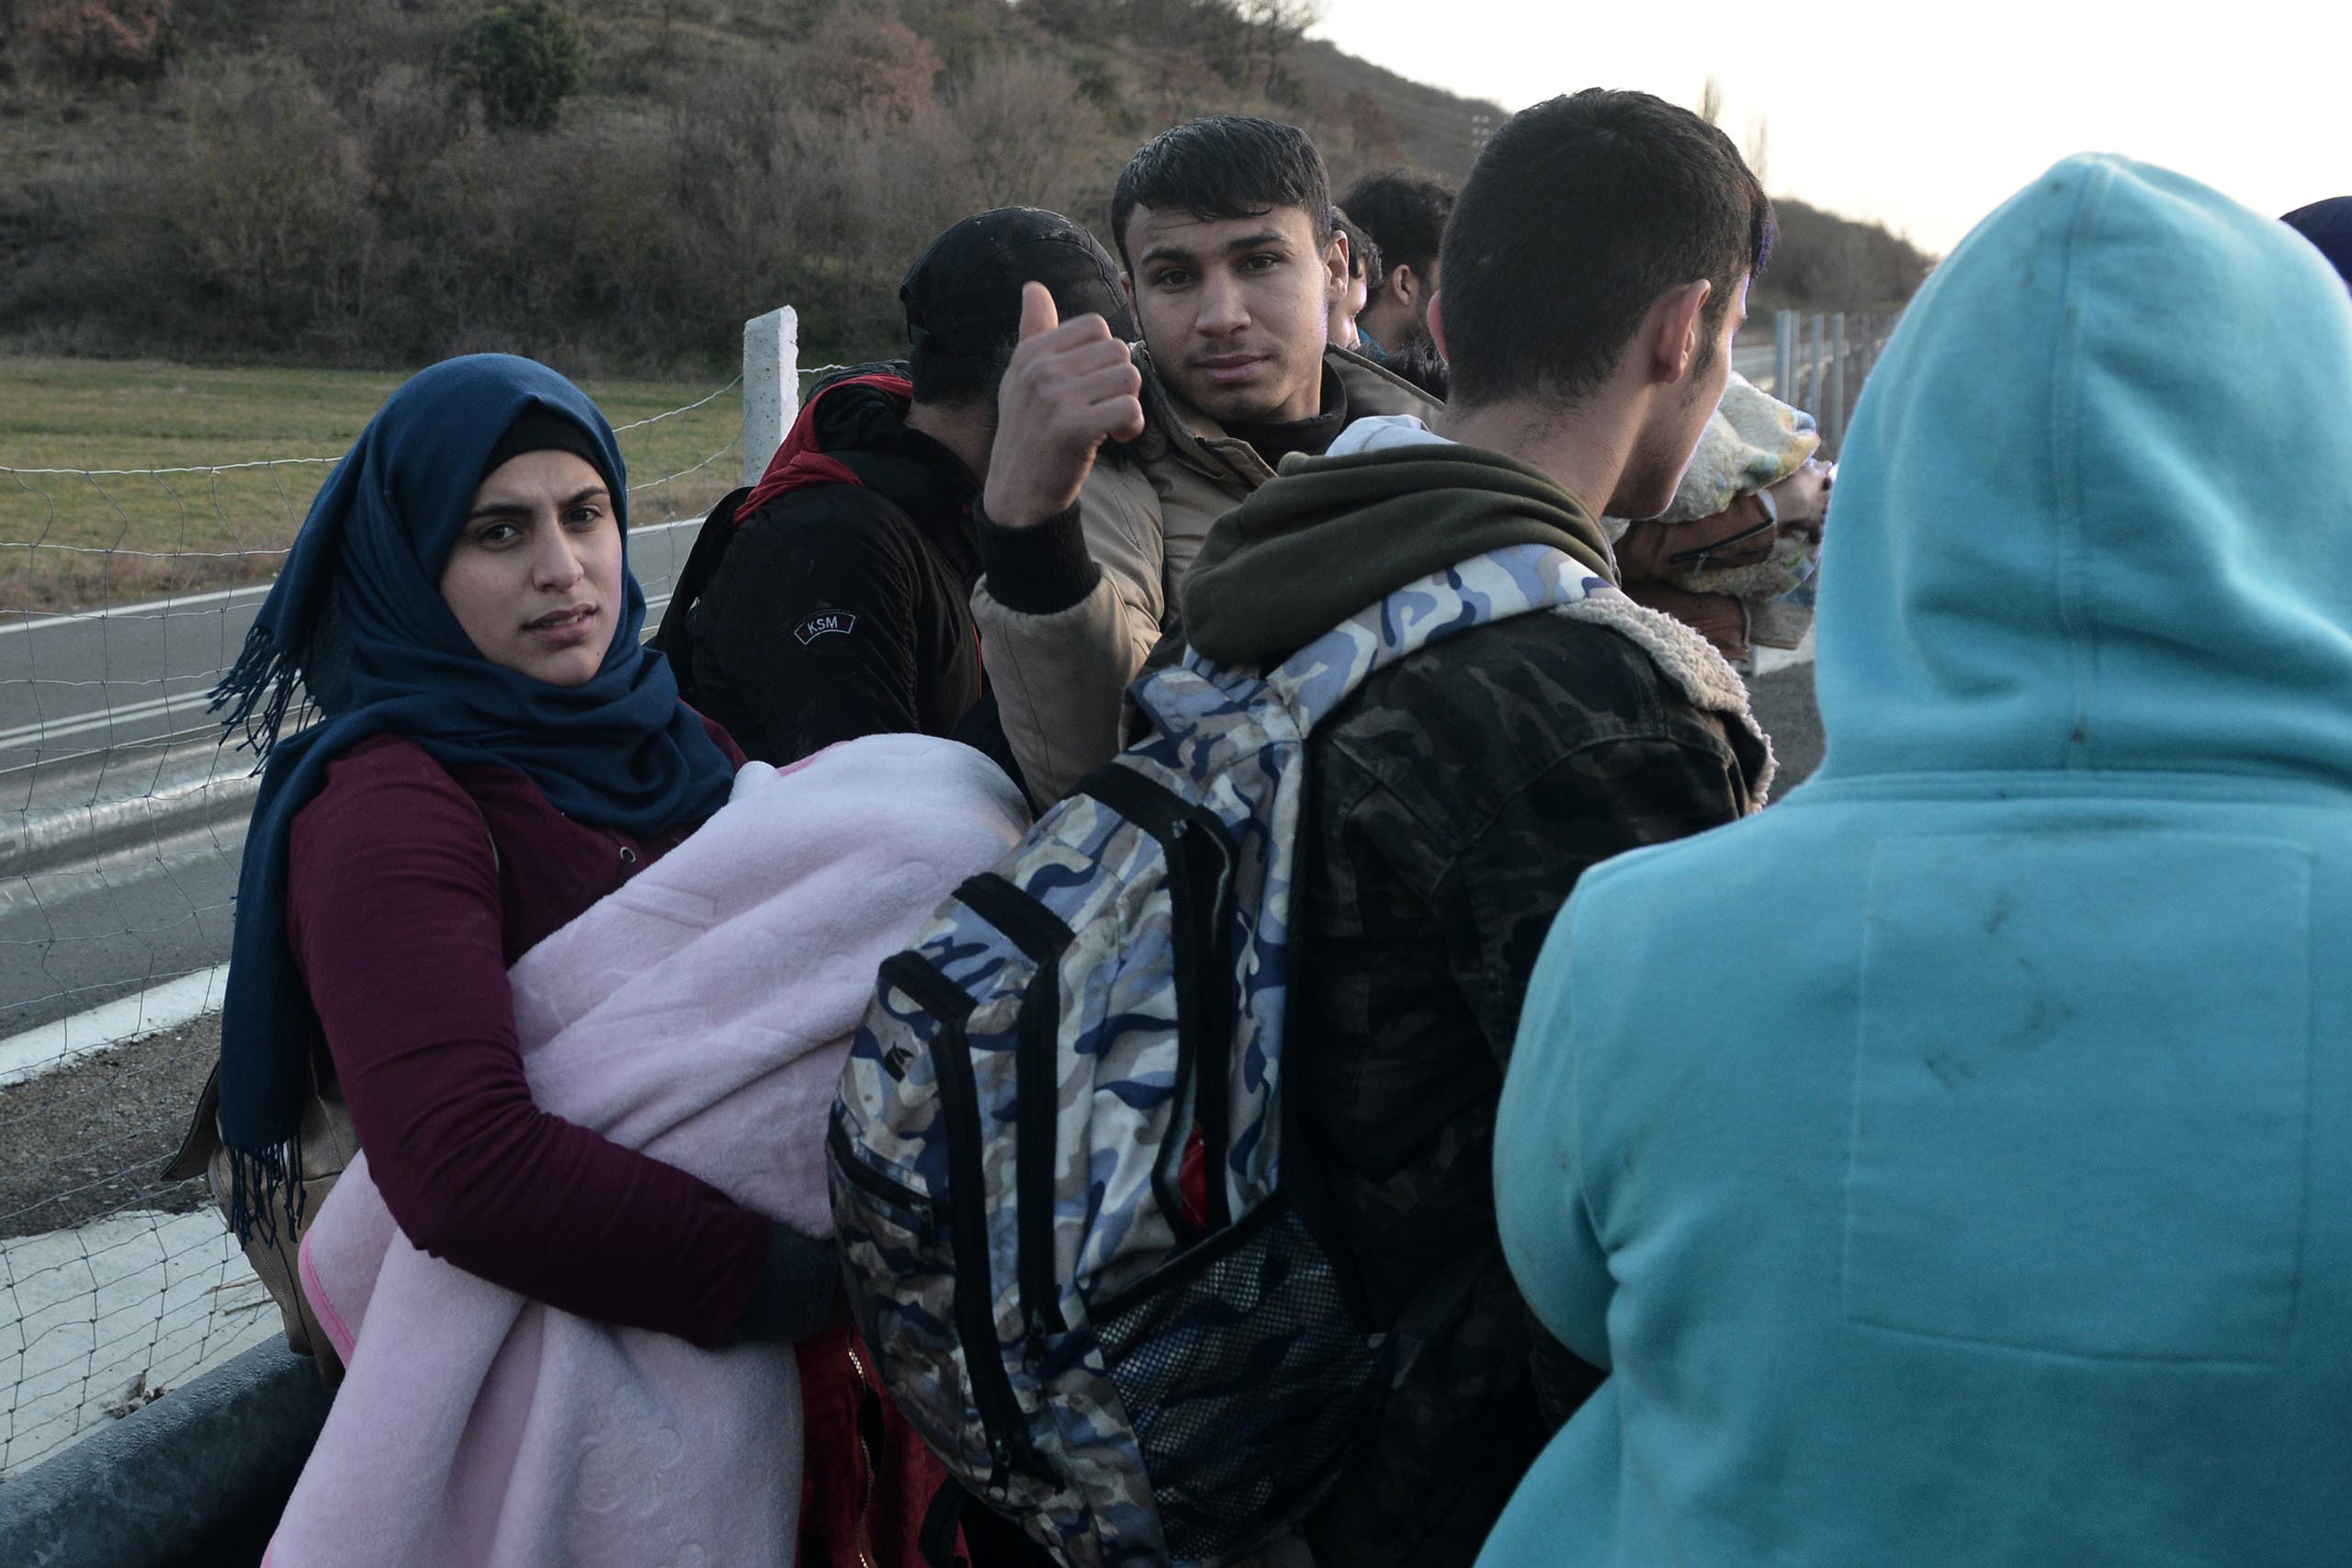 Migrants being arrested by police on the Greek side of the Greece-Turkey border near Kastanies, March 3, 2020. (AFP)